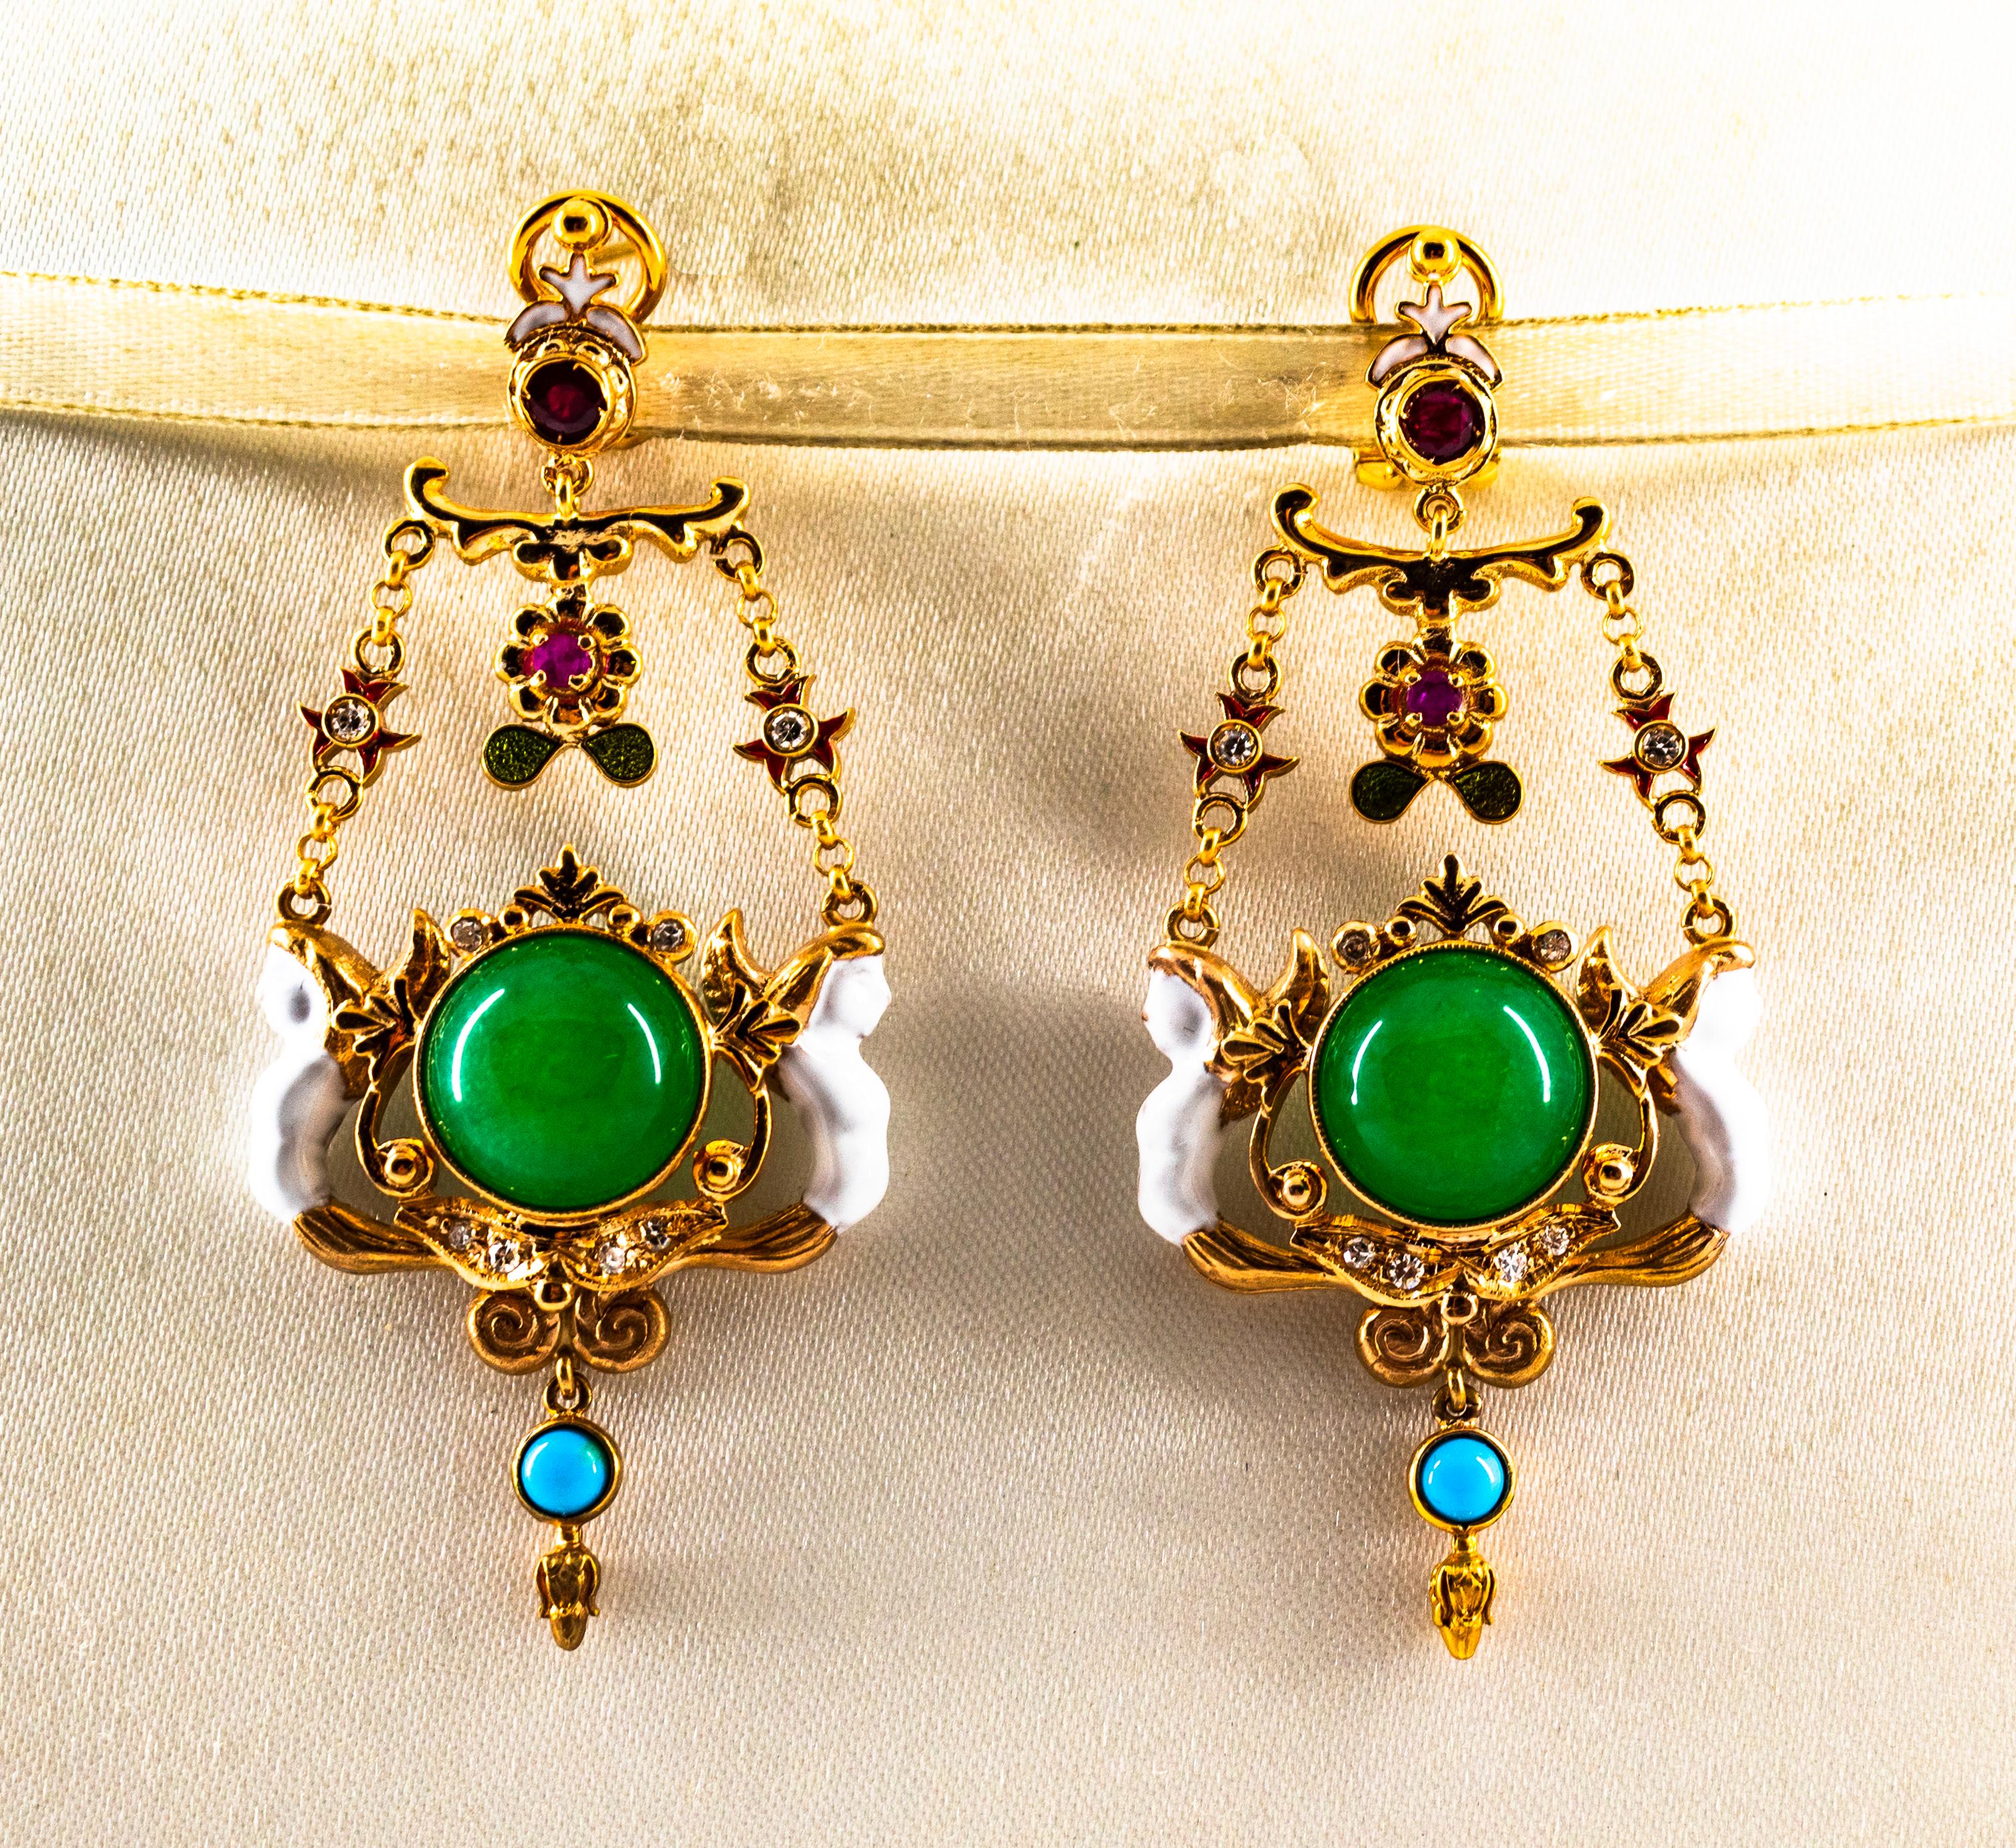 These Earrings are made of 9K Yellow Gold.
These Earrings have  0.30 Carats of White Modern Round Cut Diamonds.
These Earrings have 0.50 Carats of Rubies.
These Earrings have Jade and Turquoise.
These Earrings have also Enamel.
All our Earrings have